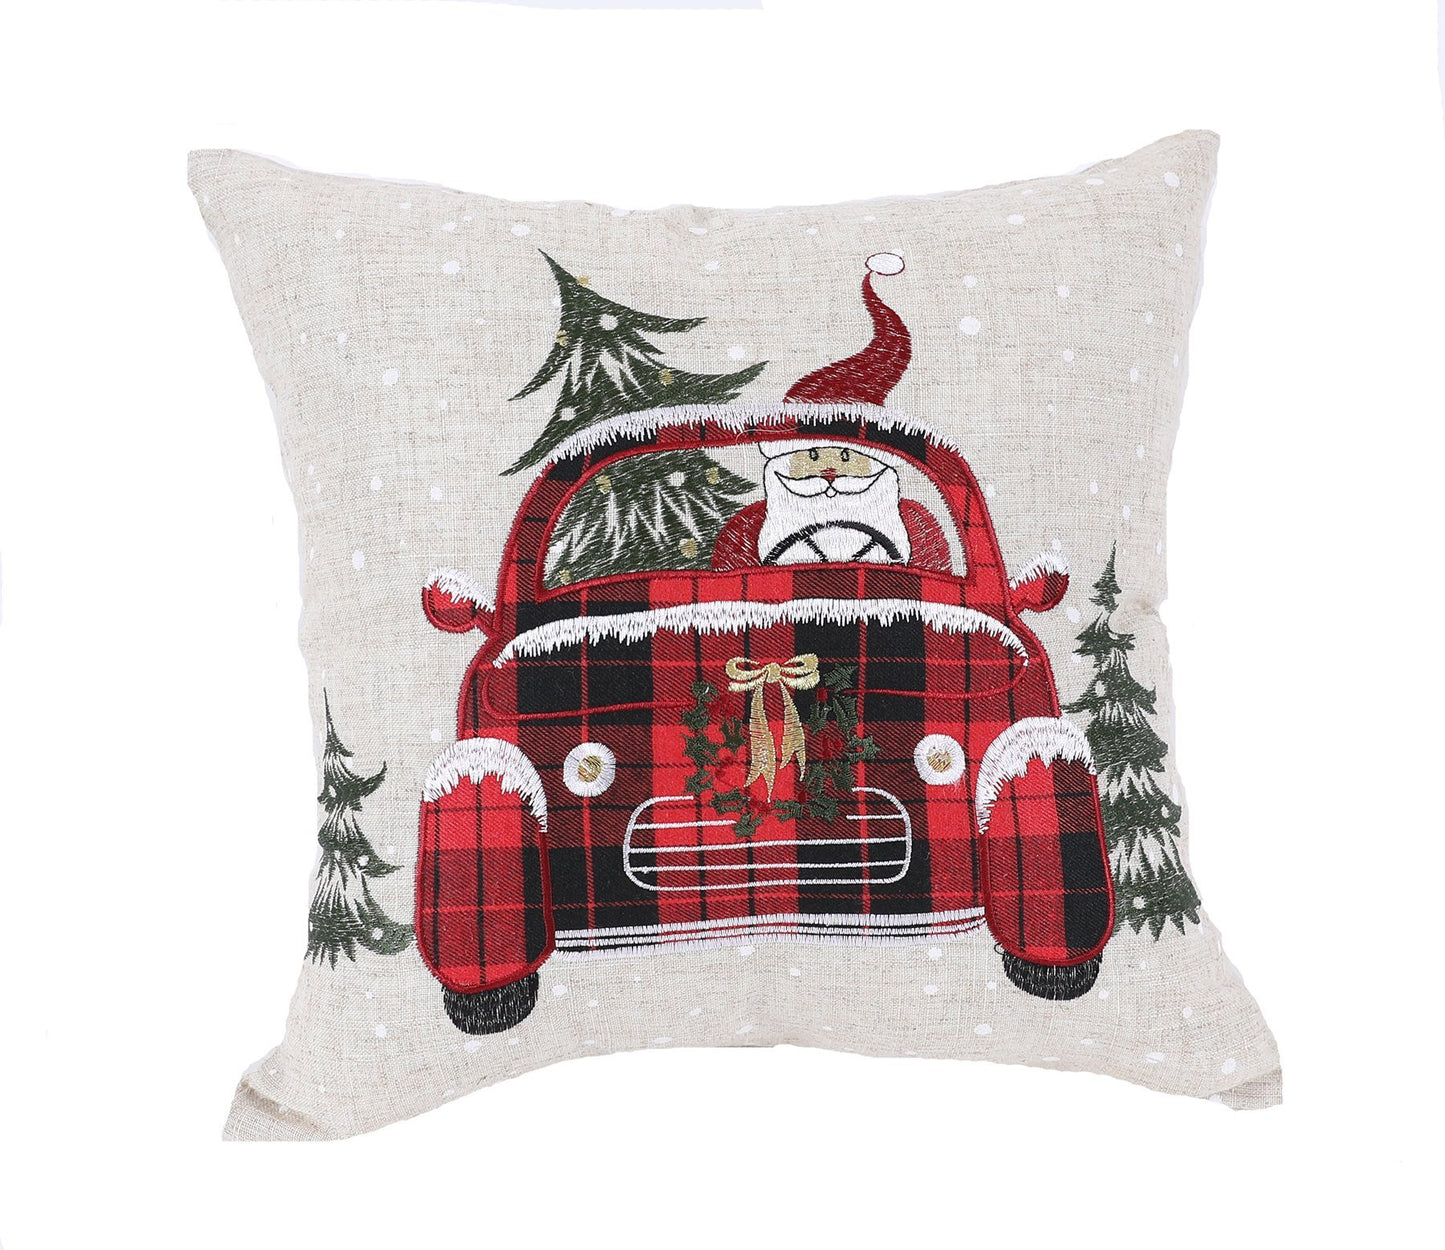 Santa Claus Riding On Car Christmas Pillow 14 by 14-Inch